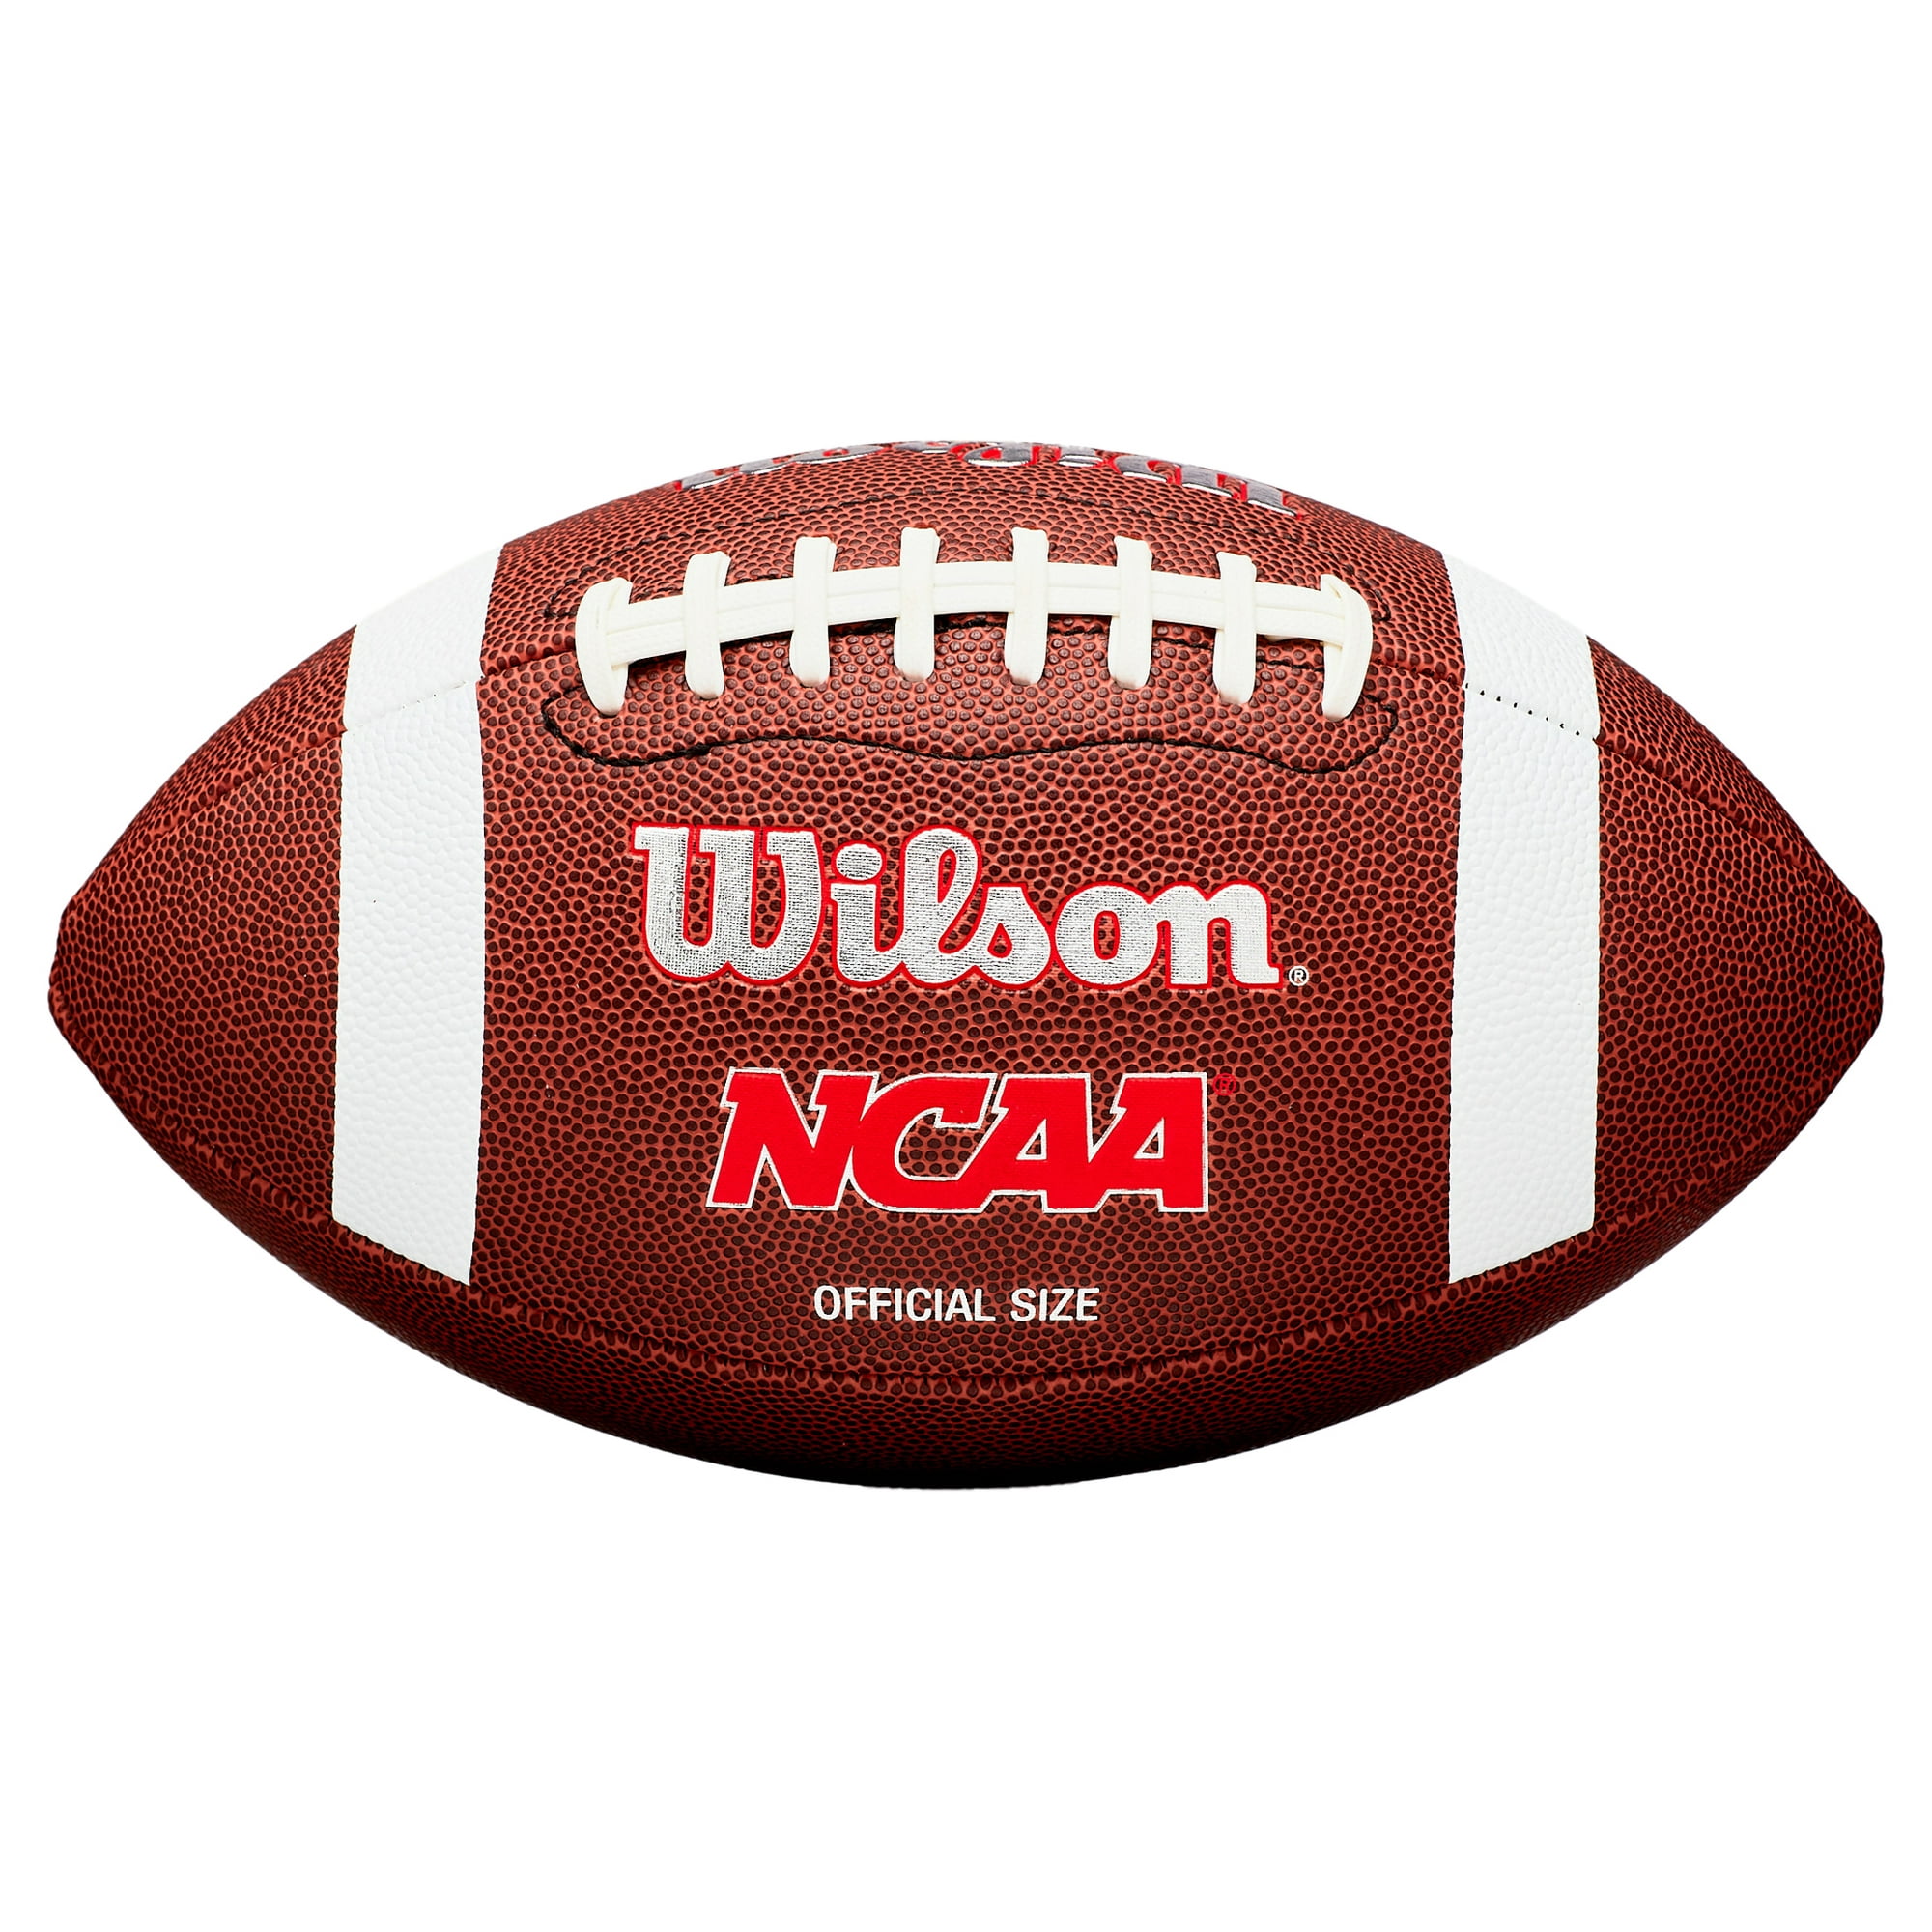 Wilson NCAA Red Zone Series Composite Football, Official Size